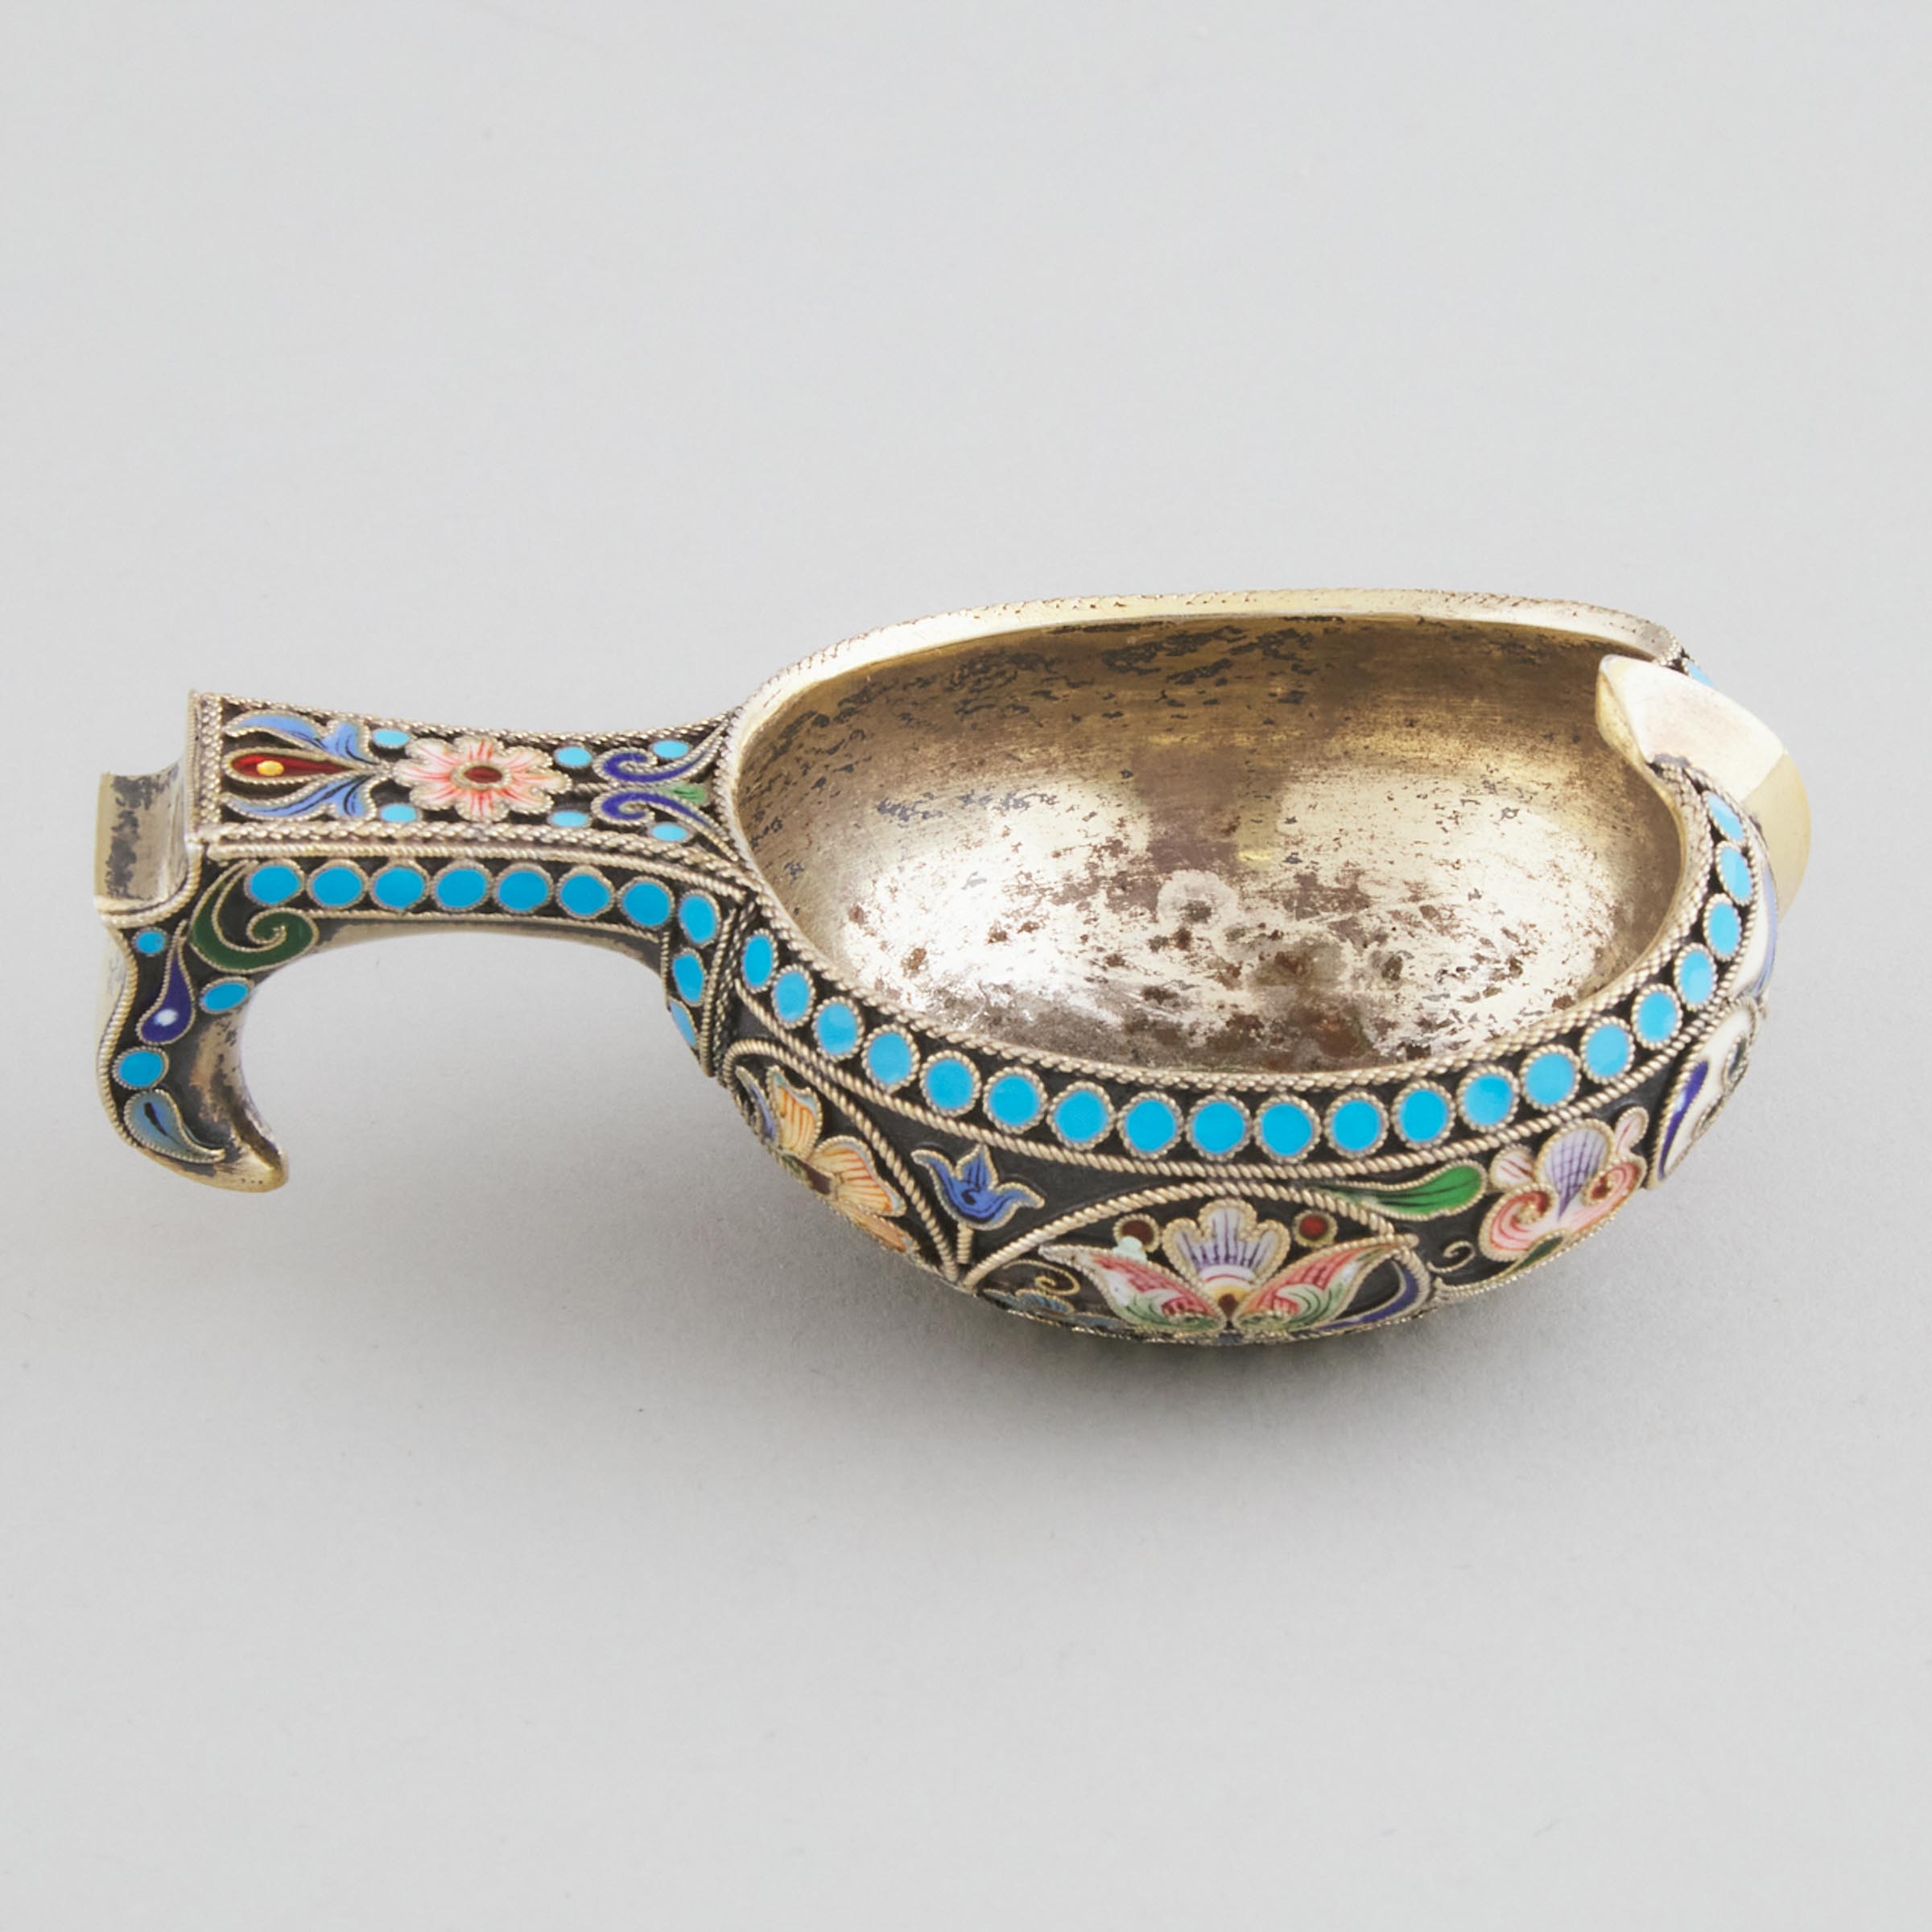 Russian Silver-Gilt and Painted Cloisonné Enamel Small Kovsh, Pavel Ovchinnikov, Moscow, 1880s